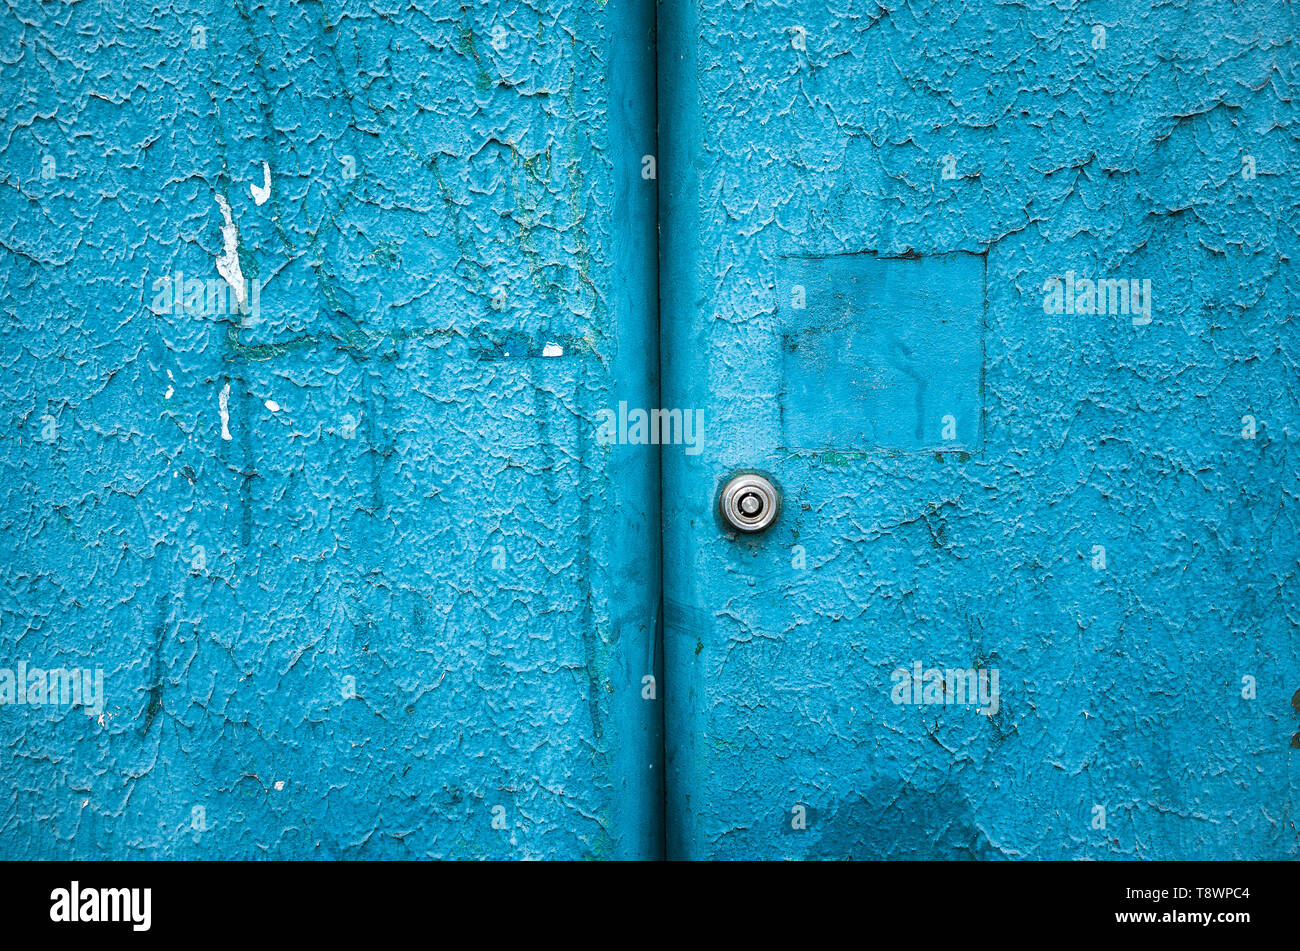 Textured, grungy blue cabinet door with keyhole. Stock Photo